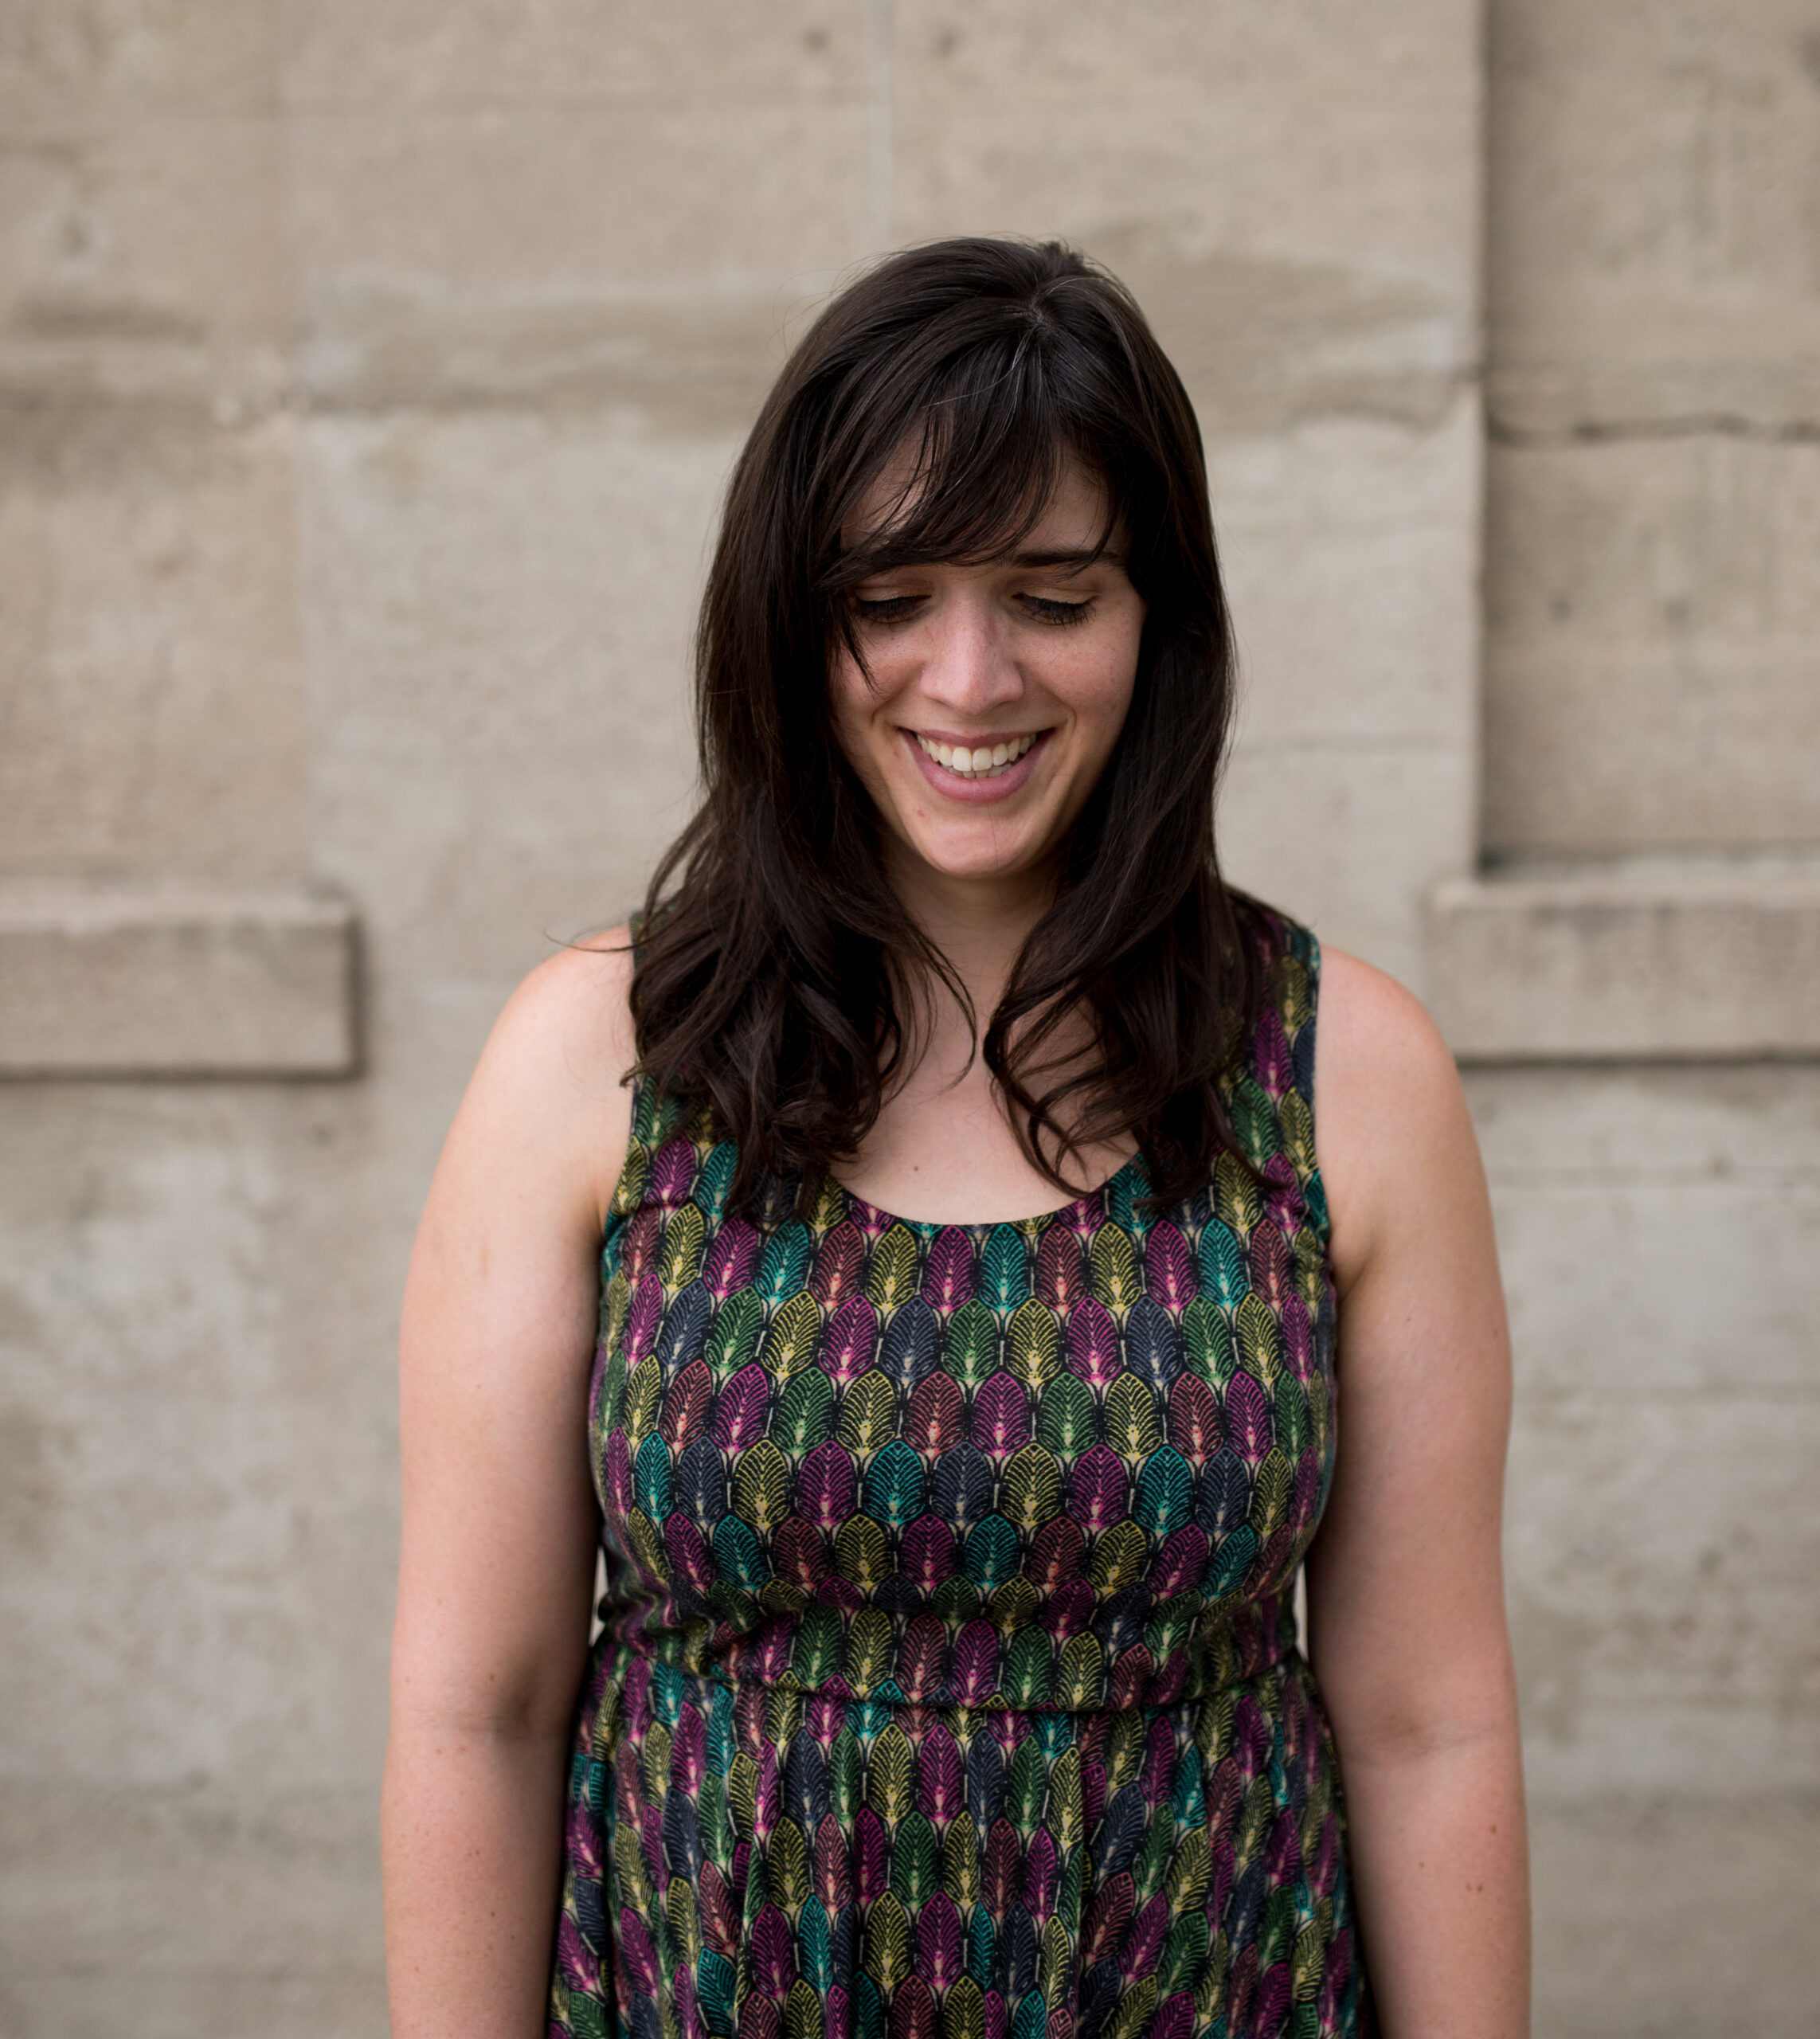 This is a headshot of Kate Speer, who is a white woman. She is standing in front of a blurred concrete wall. She is wearing a sleeveless dress with a multi-colored pattern. She is smiling with her gaze looking down. She has shoulder length dark brown hair and bangs.